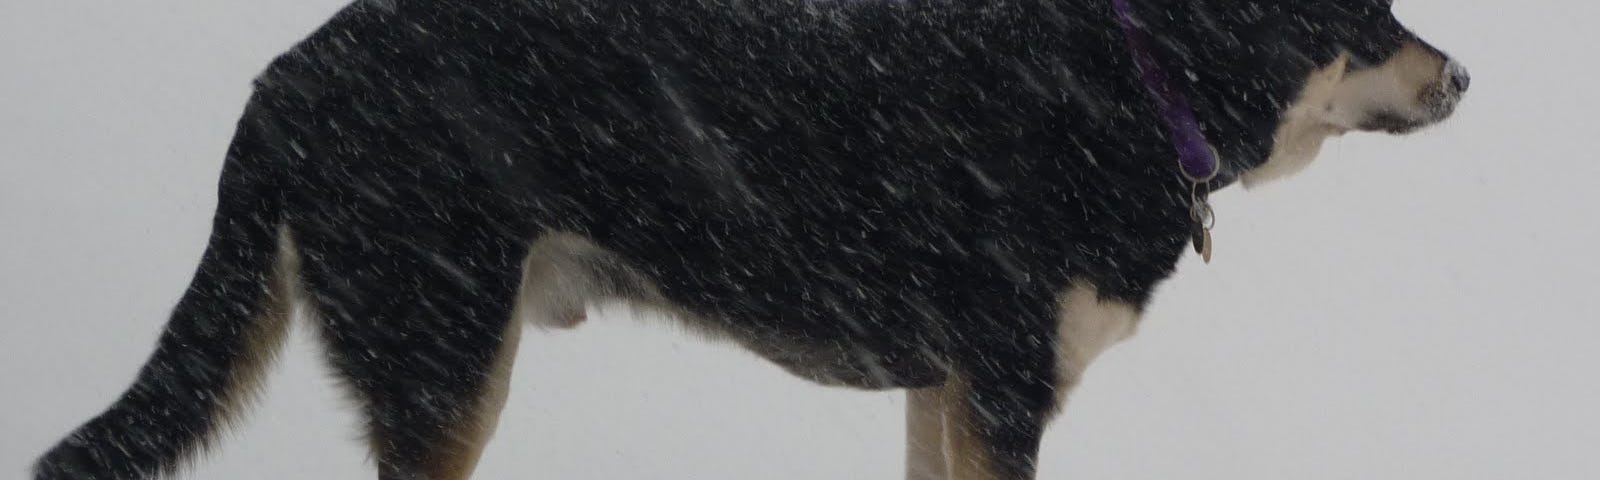 Black and white dog standing in the snow during a snowstorm.